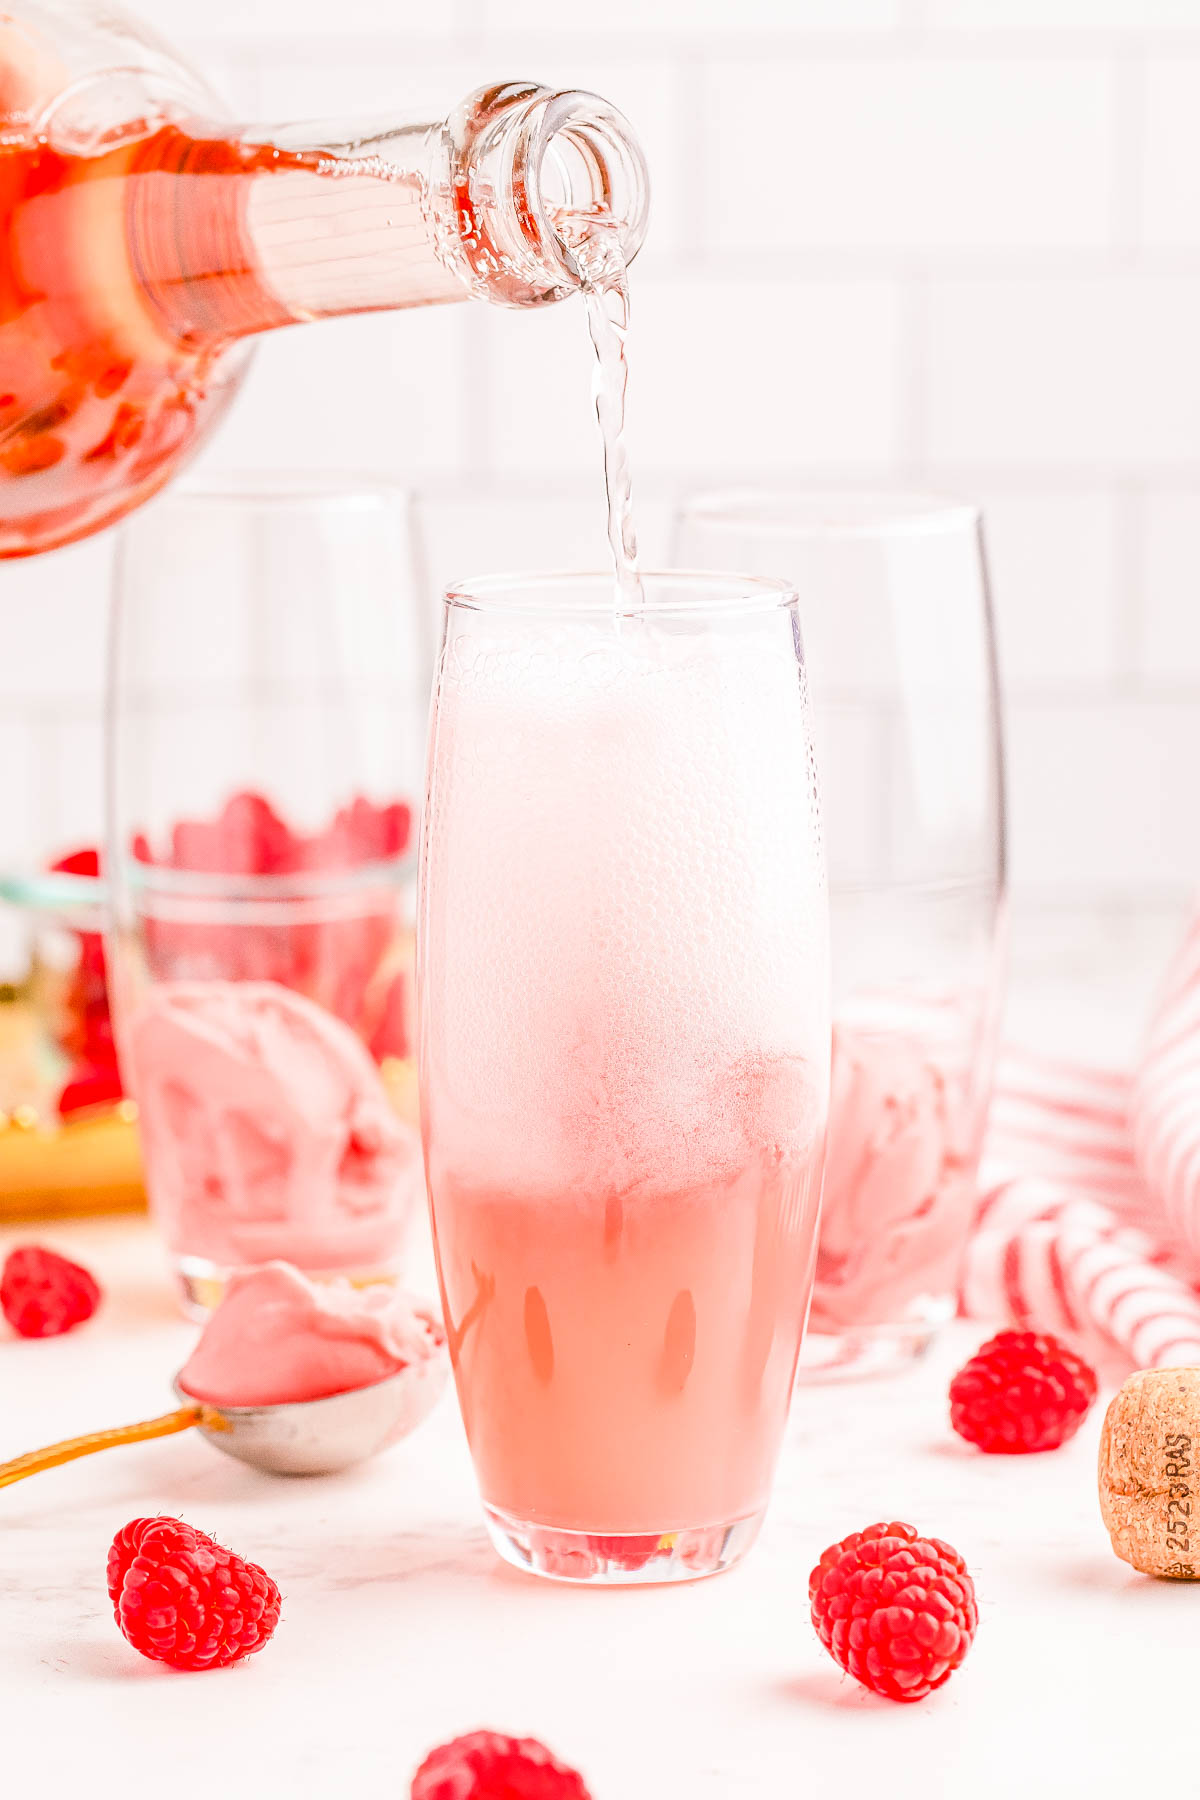 A bottle of rosé champagne is being poured into a tall glass, causing it to foam. Fresh raspberries are scattered on the table and a spoon with raspberry sorbet is nearby.